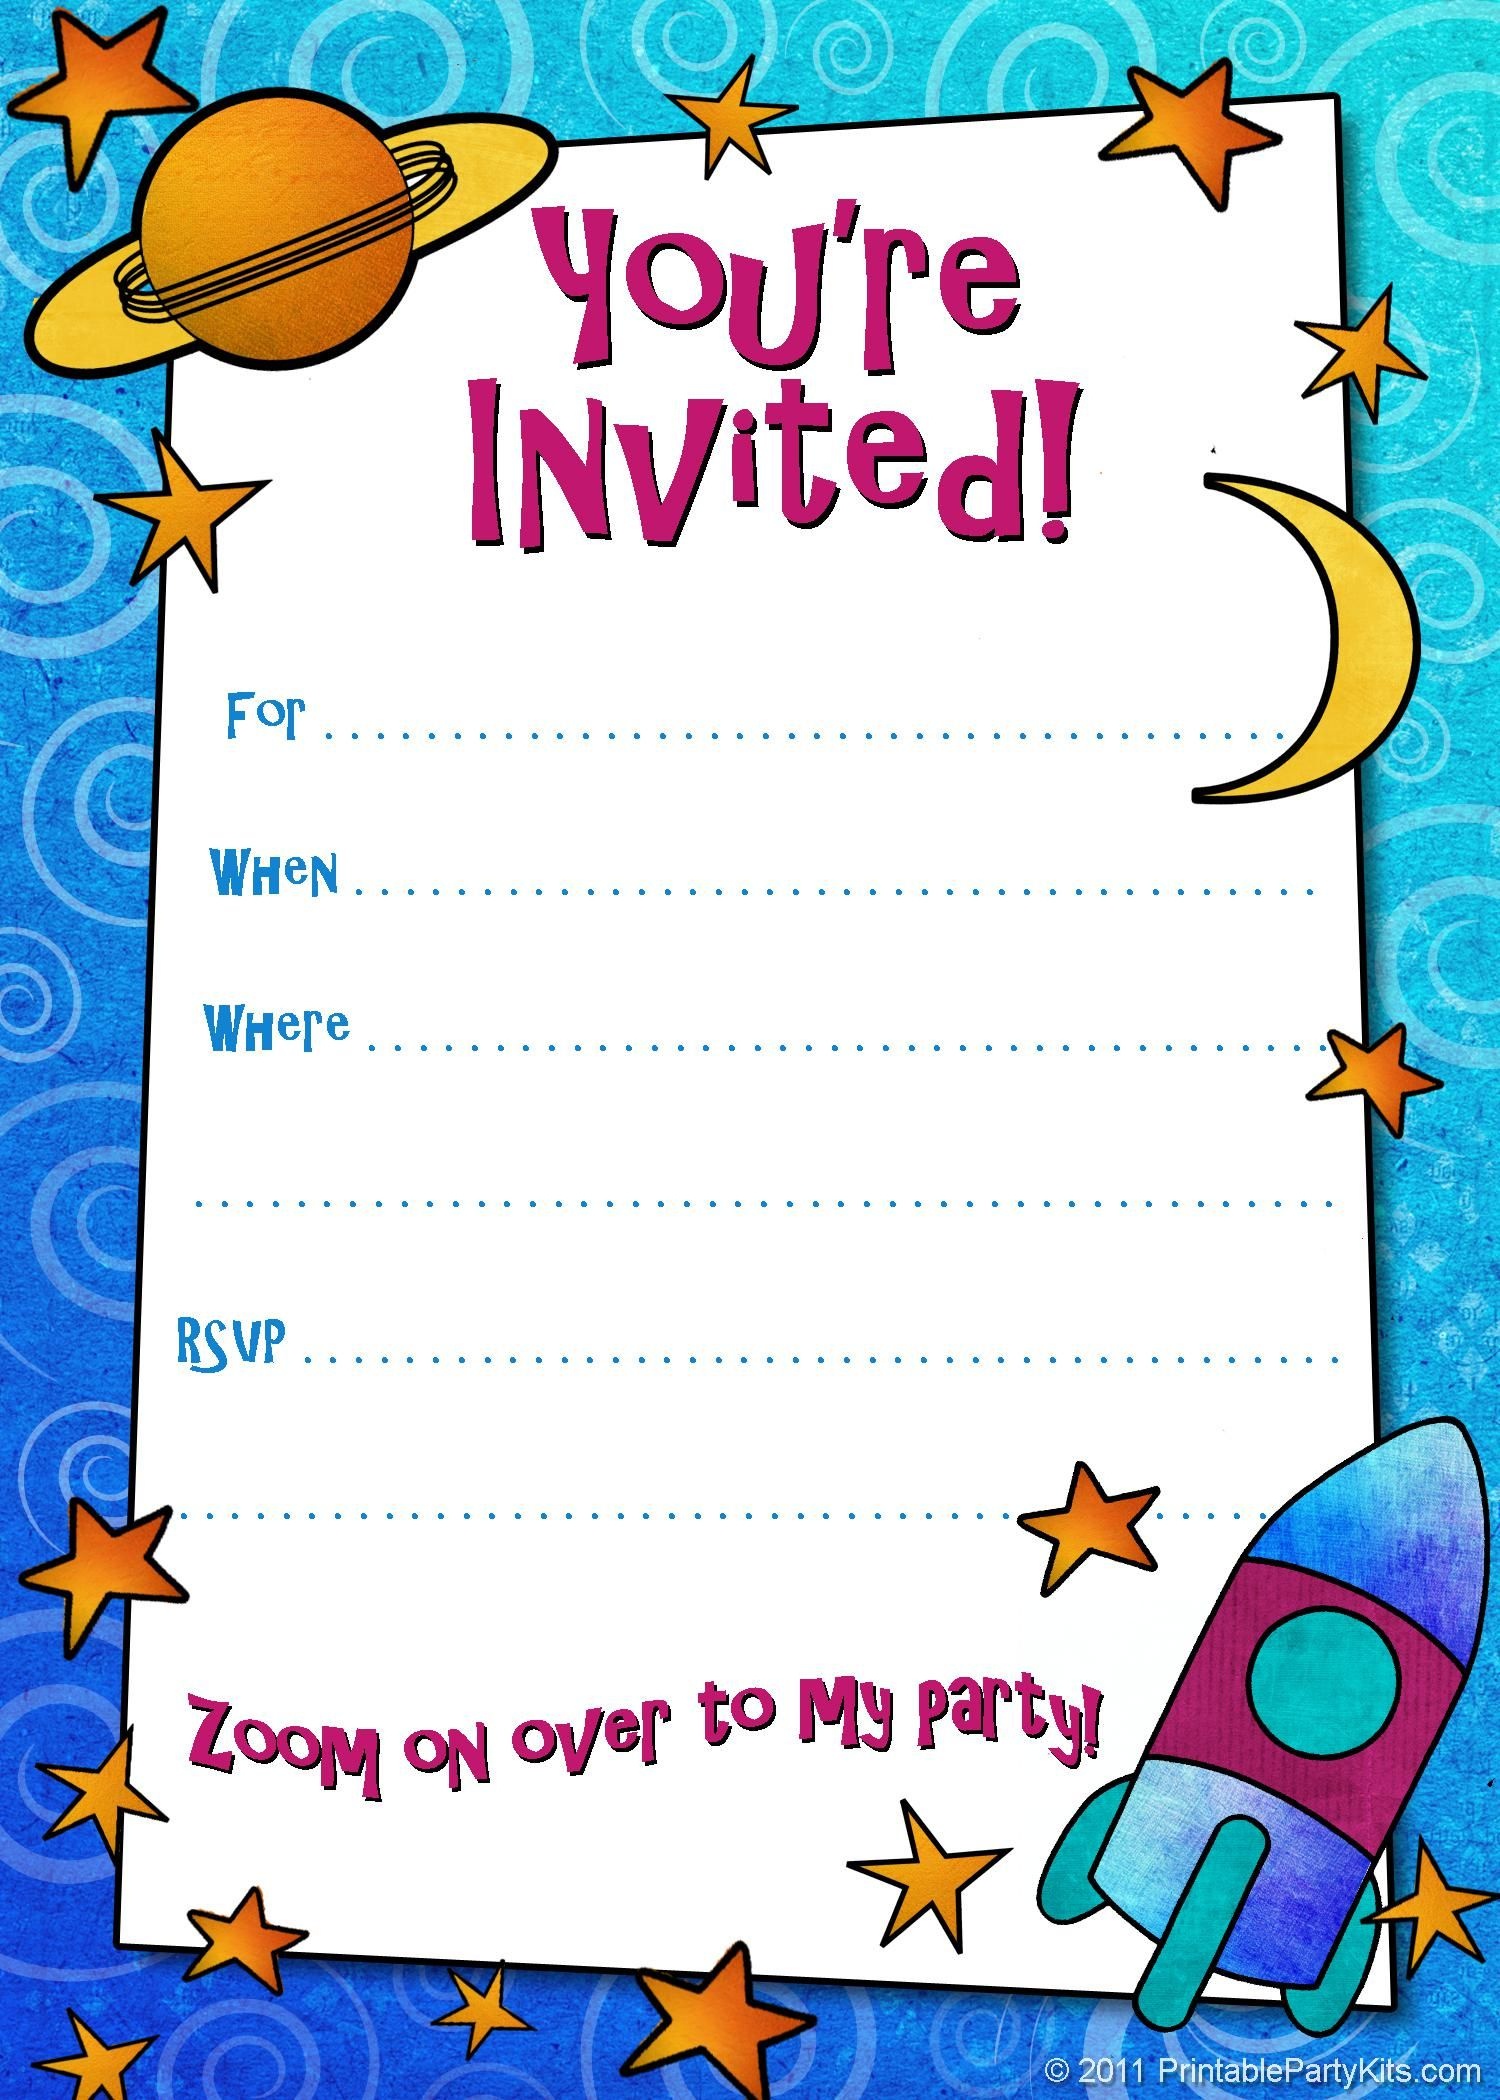 Make Your Own Birthday Party Invitations | Invitatins | Birthday - Make Your Own Birthday Party Invitations Free Printable